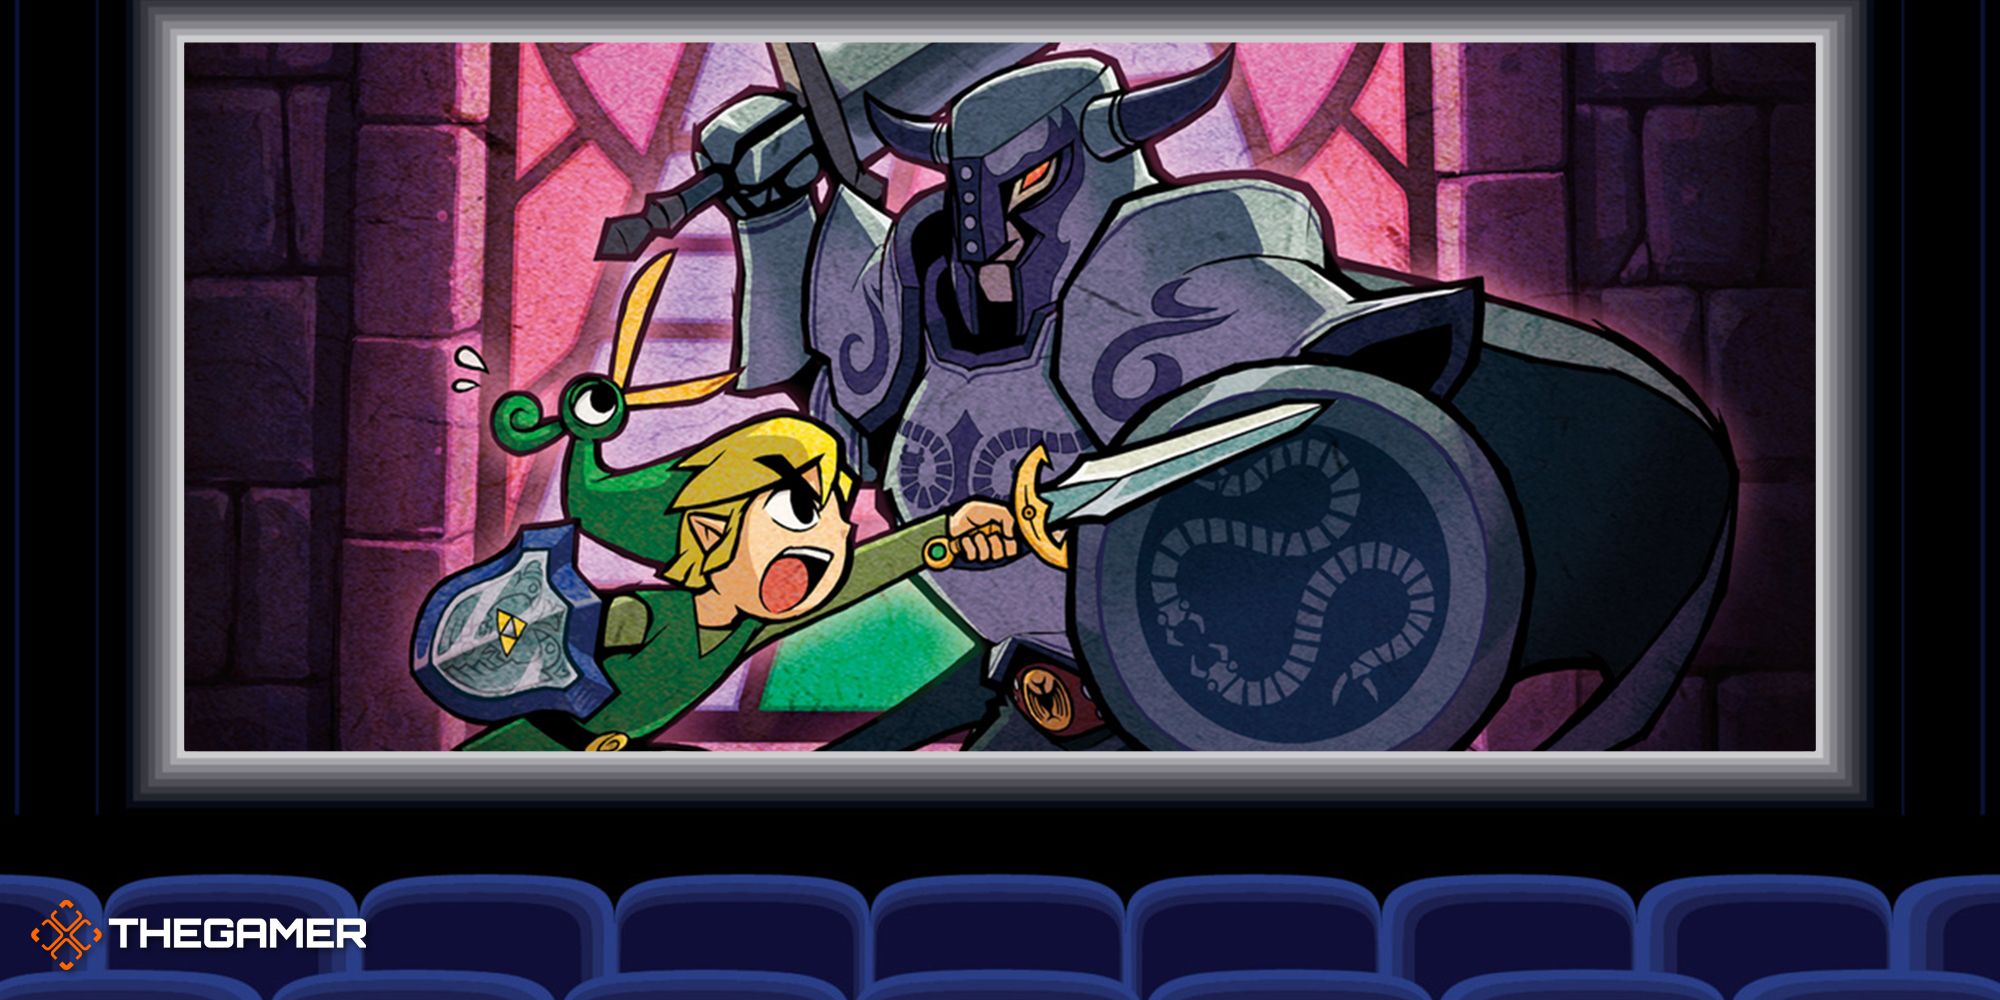 Link fighting a Dark Nut armored soldier in art from The Legend of Zelda: The Minish Cap, playing on a movie screen in front of rows of chairs.